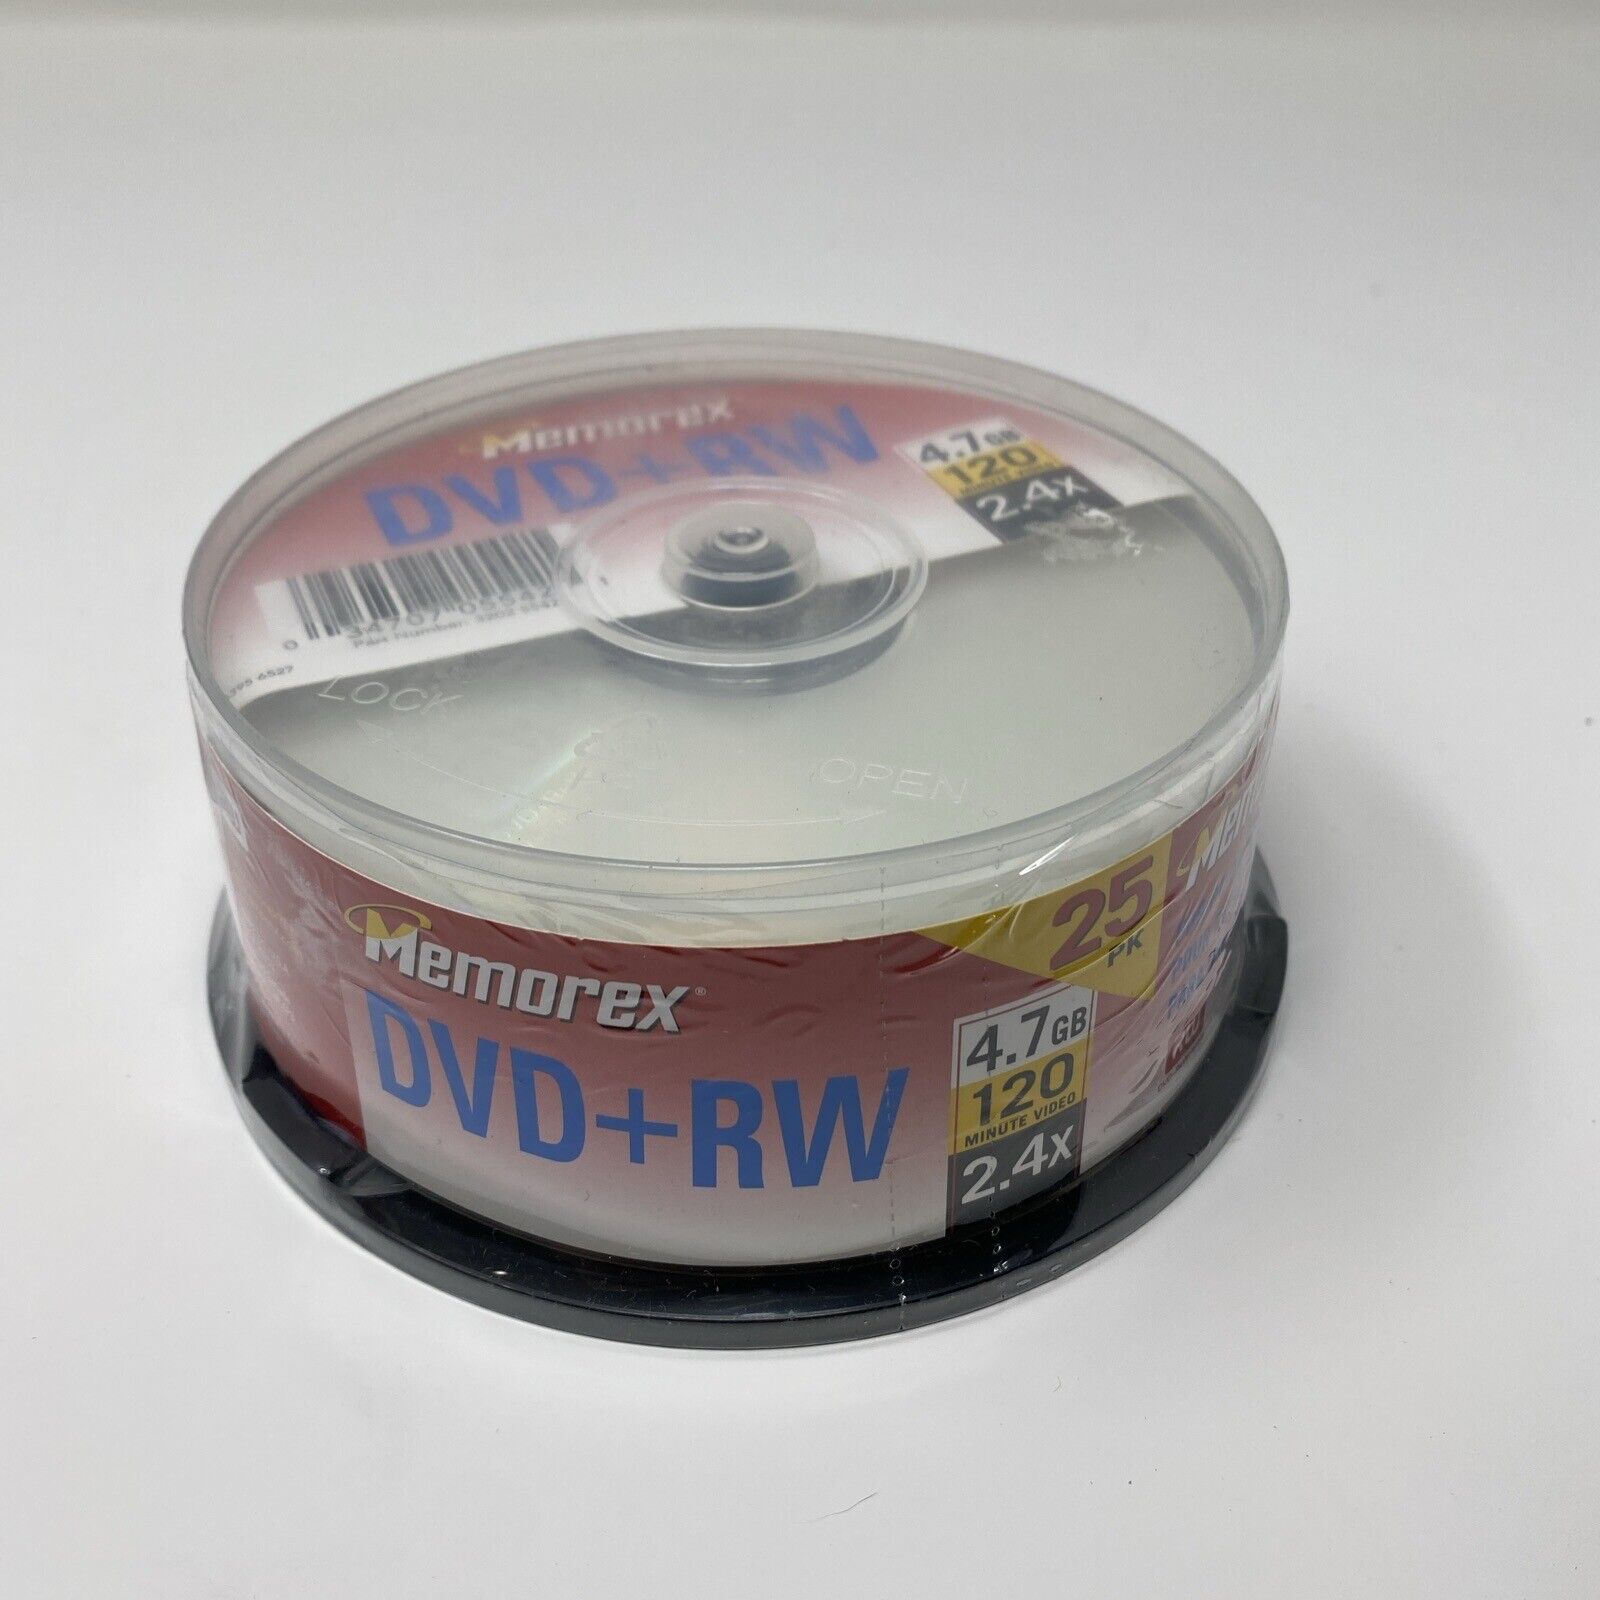 Memorex DVD+RW 4.7GB 2.4x 120 Minutes 25-Pack Spindle New Old Stock